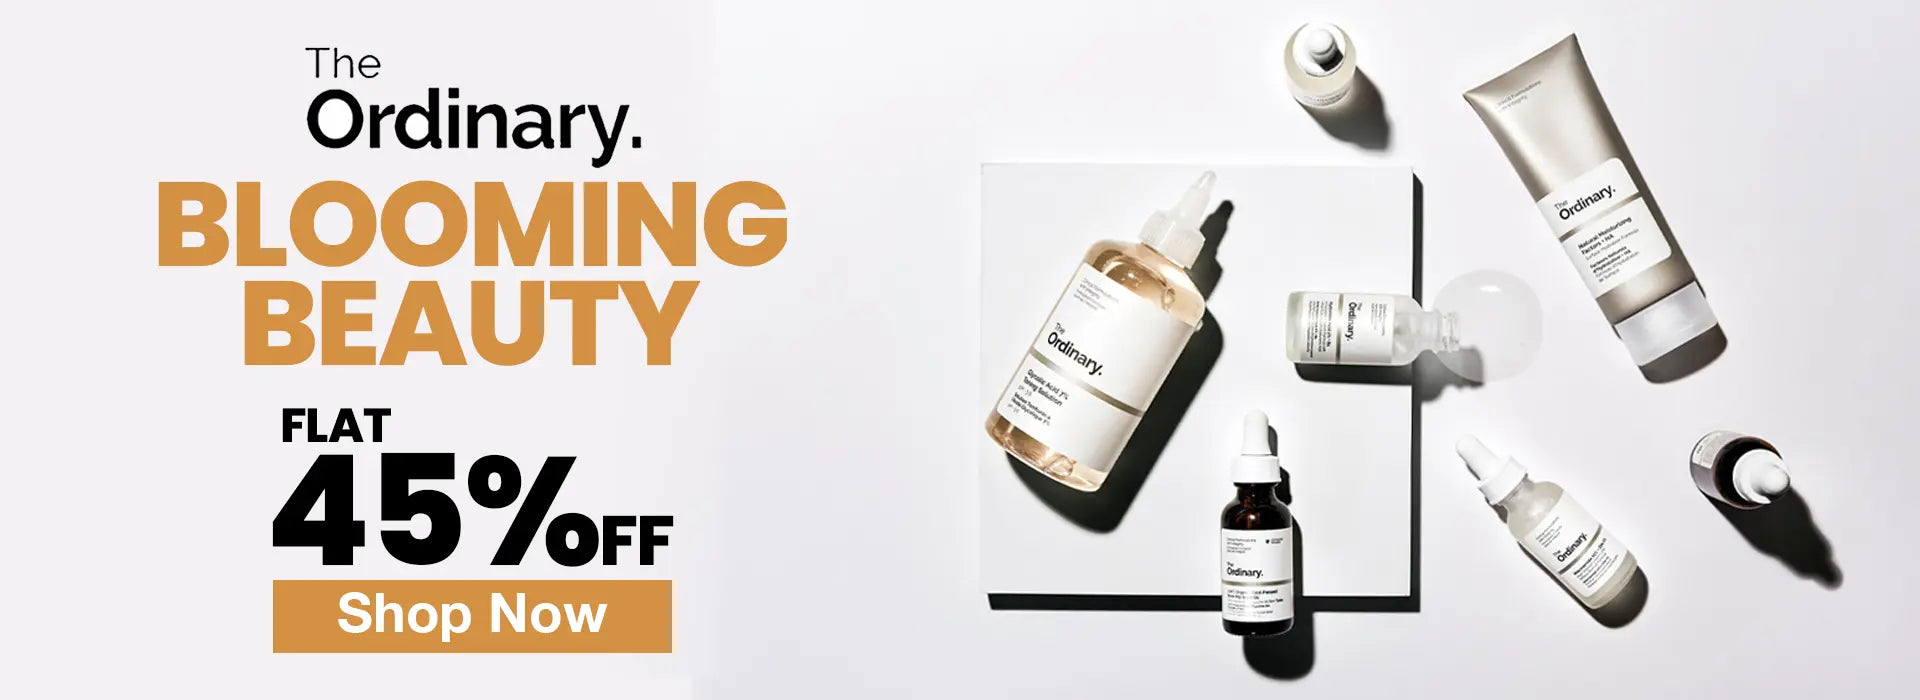 The Ordinary Serums | Flat 45% Off